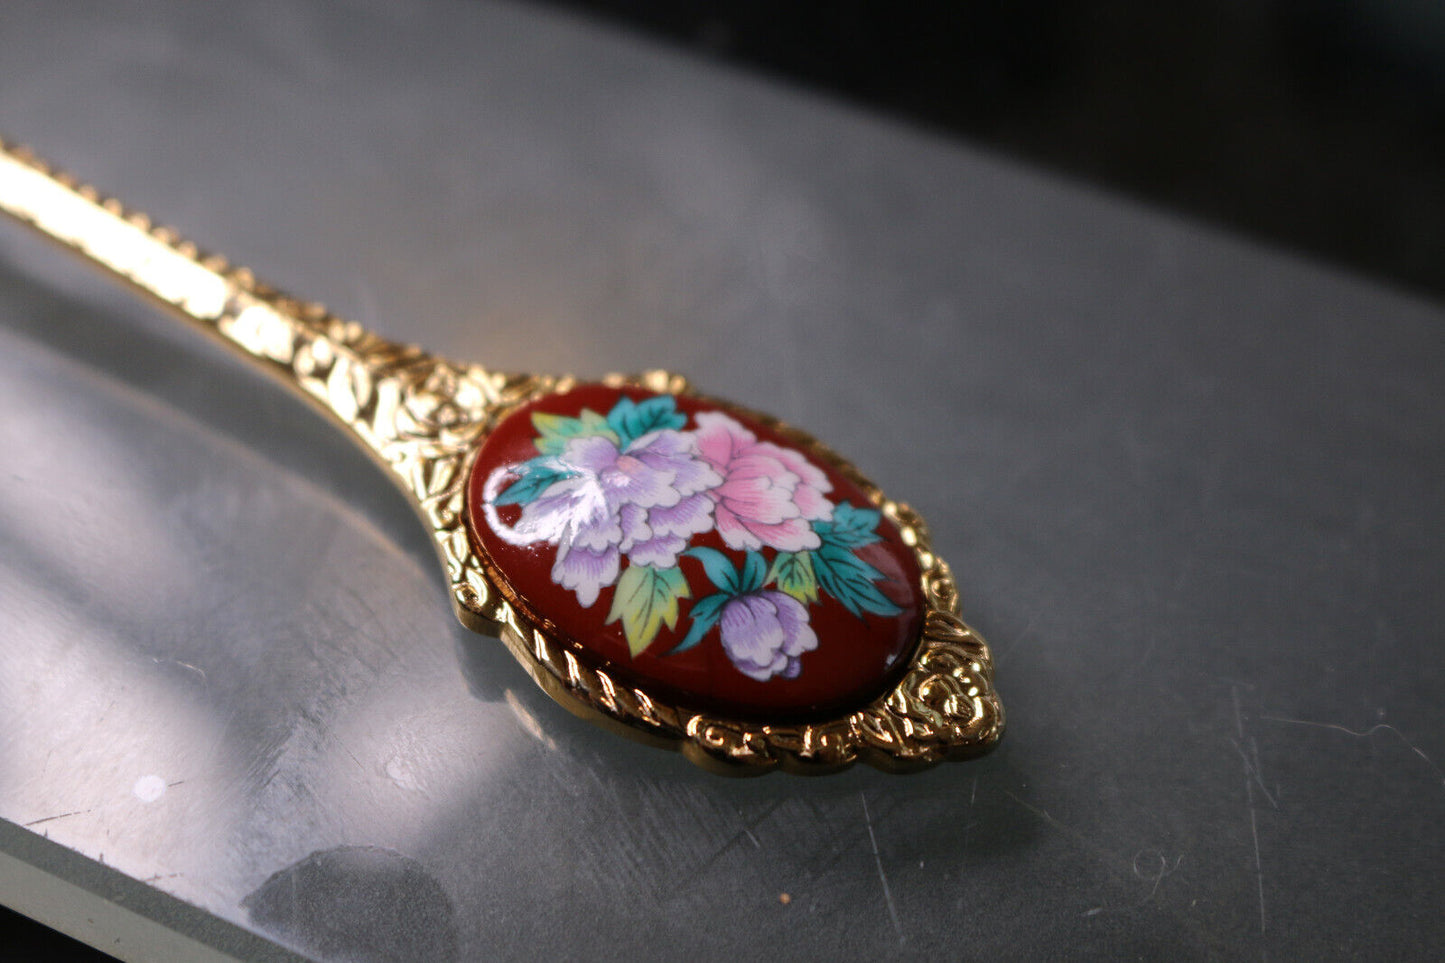 Stainless Steel Spoon Souvenir Collectible With Beautiful Flowers